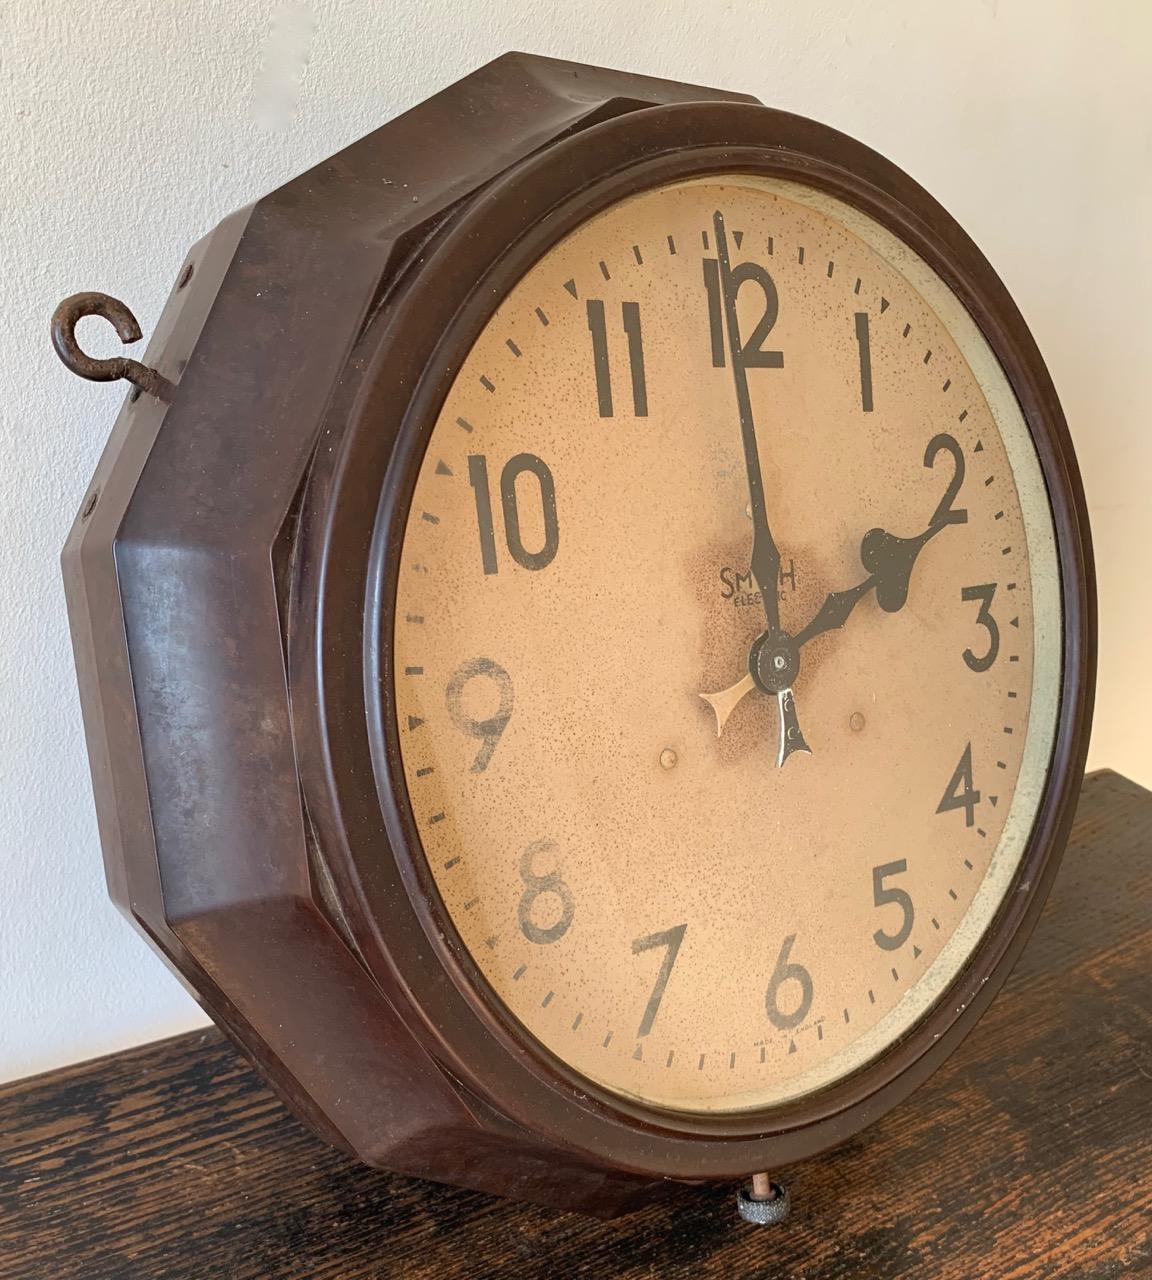 A rare double sided clock by Smith Electric. The case is Bakelite and the face is painted metal. The case is a rare 12 sided polygon shape with original hanging loops. The original electric movement didn't work so has now been fitted with a reliable